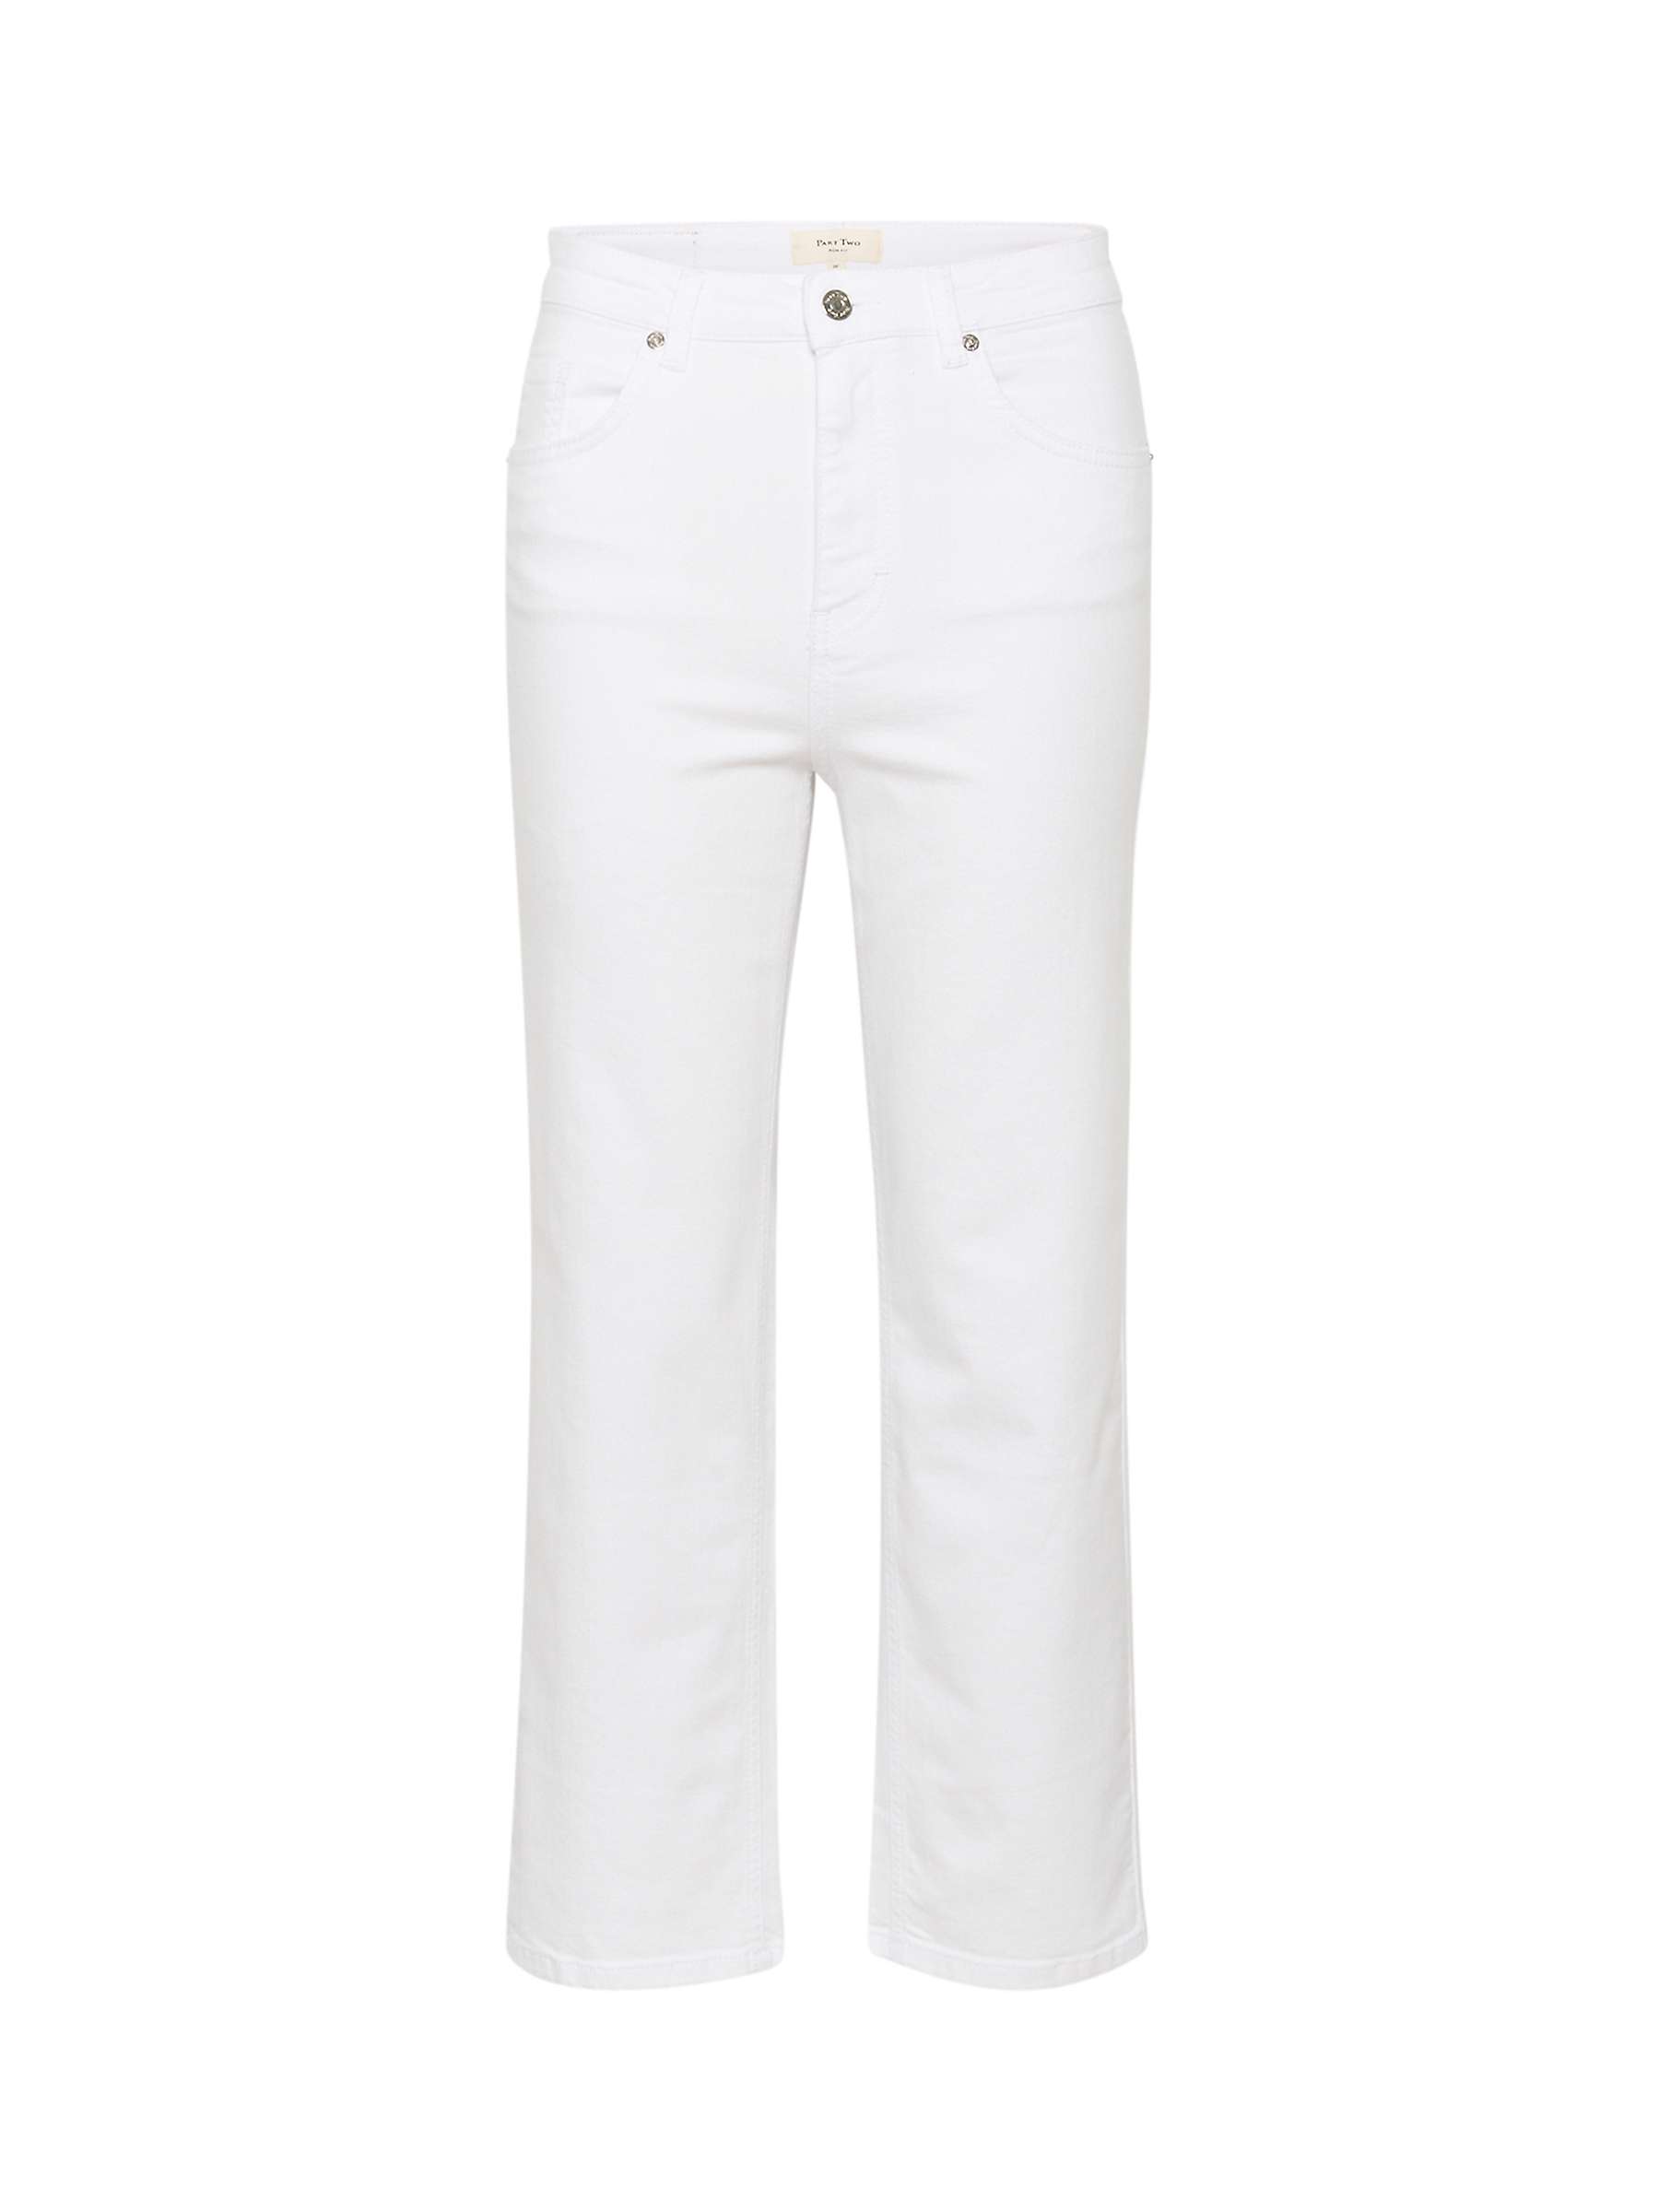 Buy Part Two Judy Straight Legs High Waist Jeans, Bright White Online at johnlewis.com